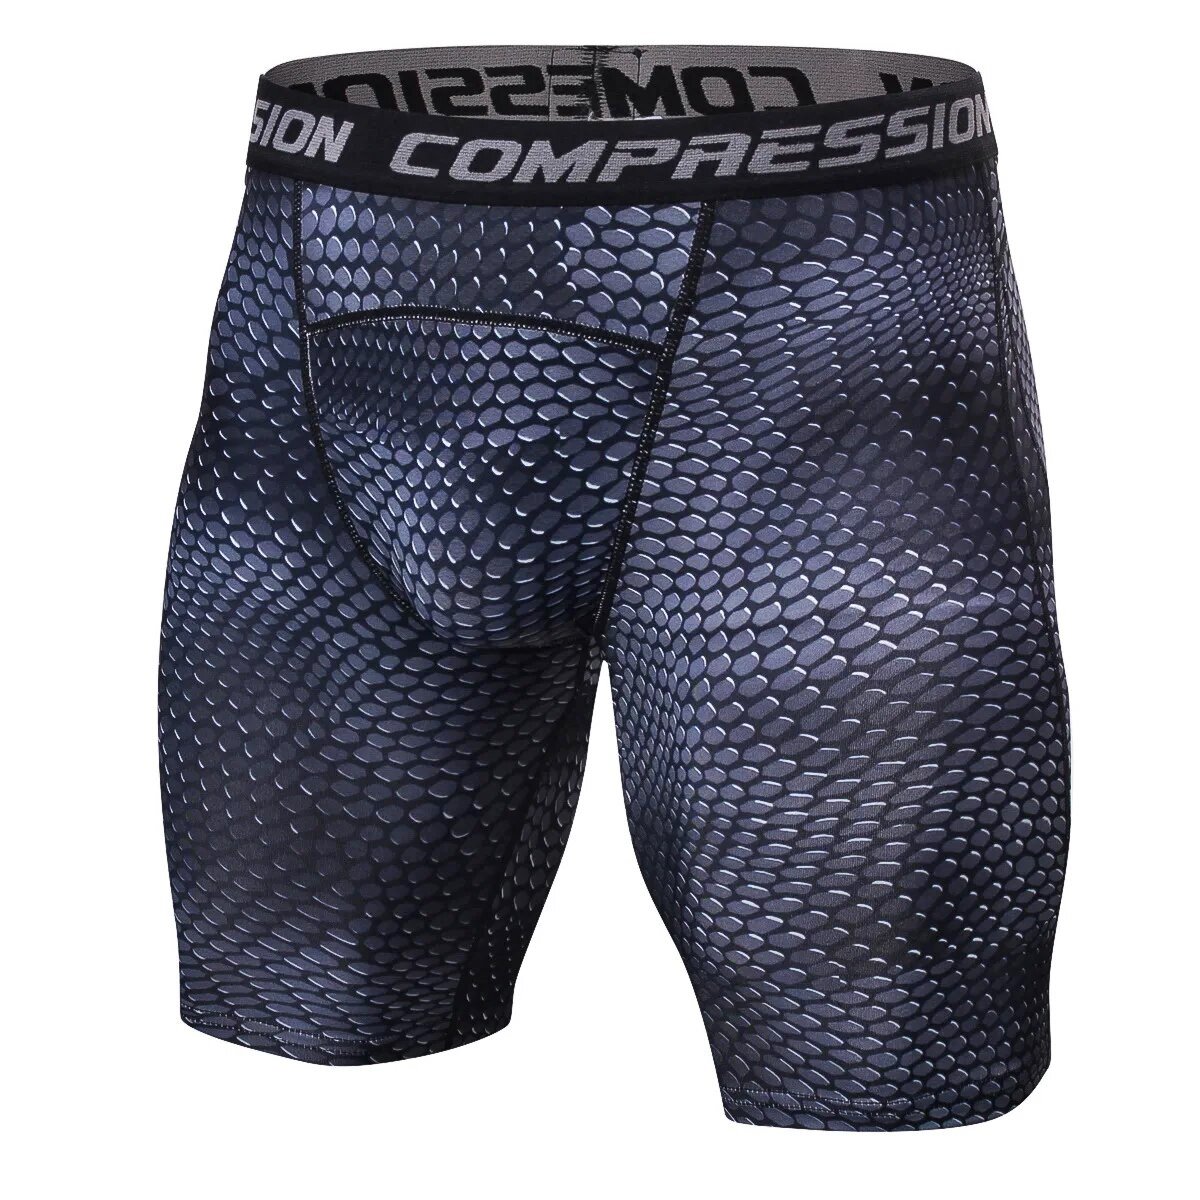 10 Incredible Men’s Knee Length Compression Shorts For 2023